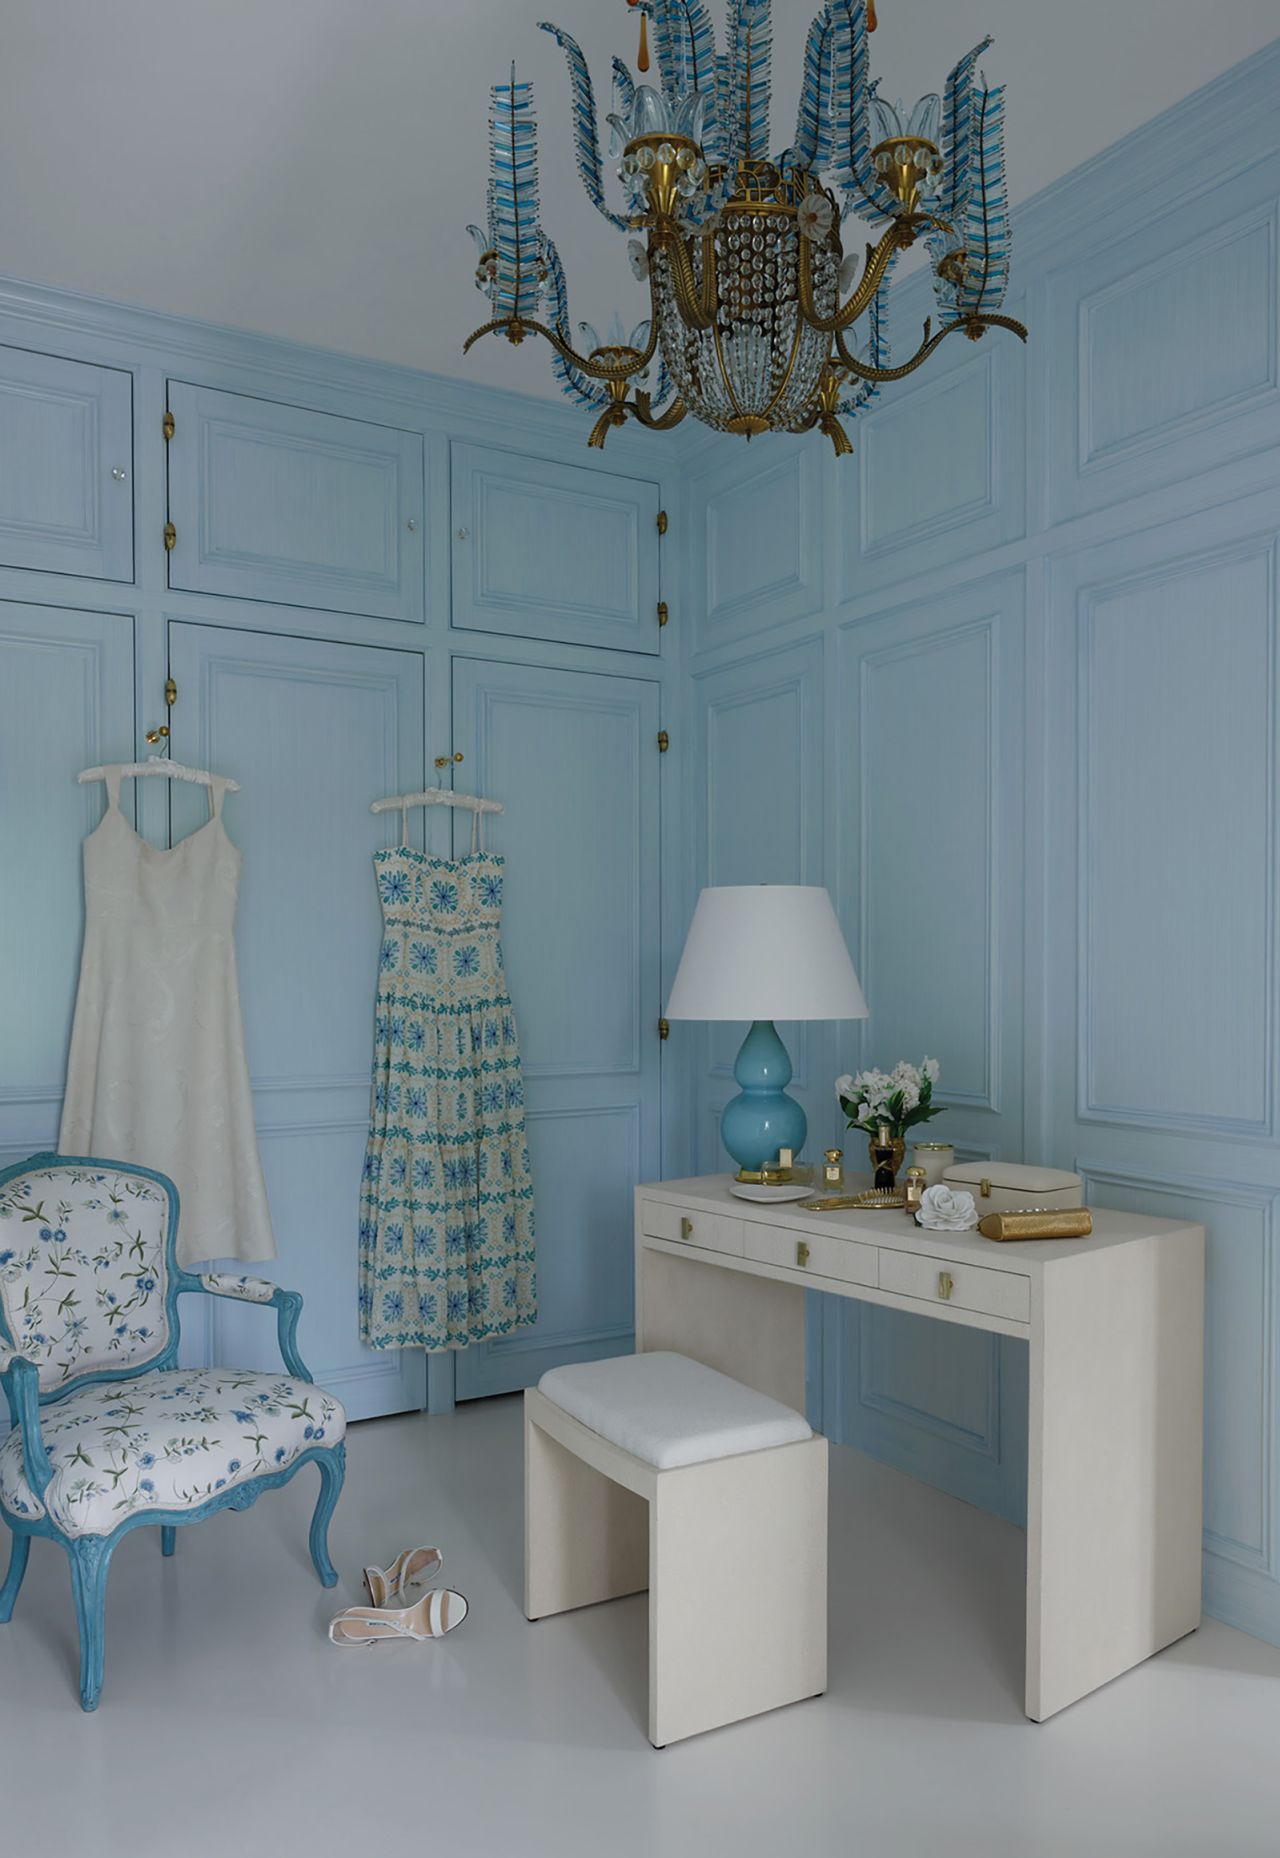 Pale blue accents — a nod to the Esteé Lauder brand — appears throughout the home.